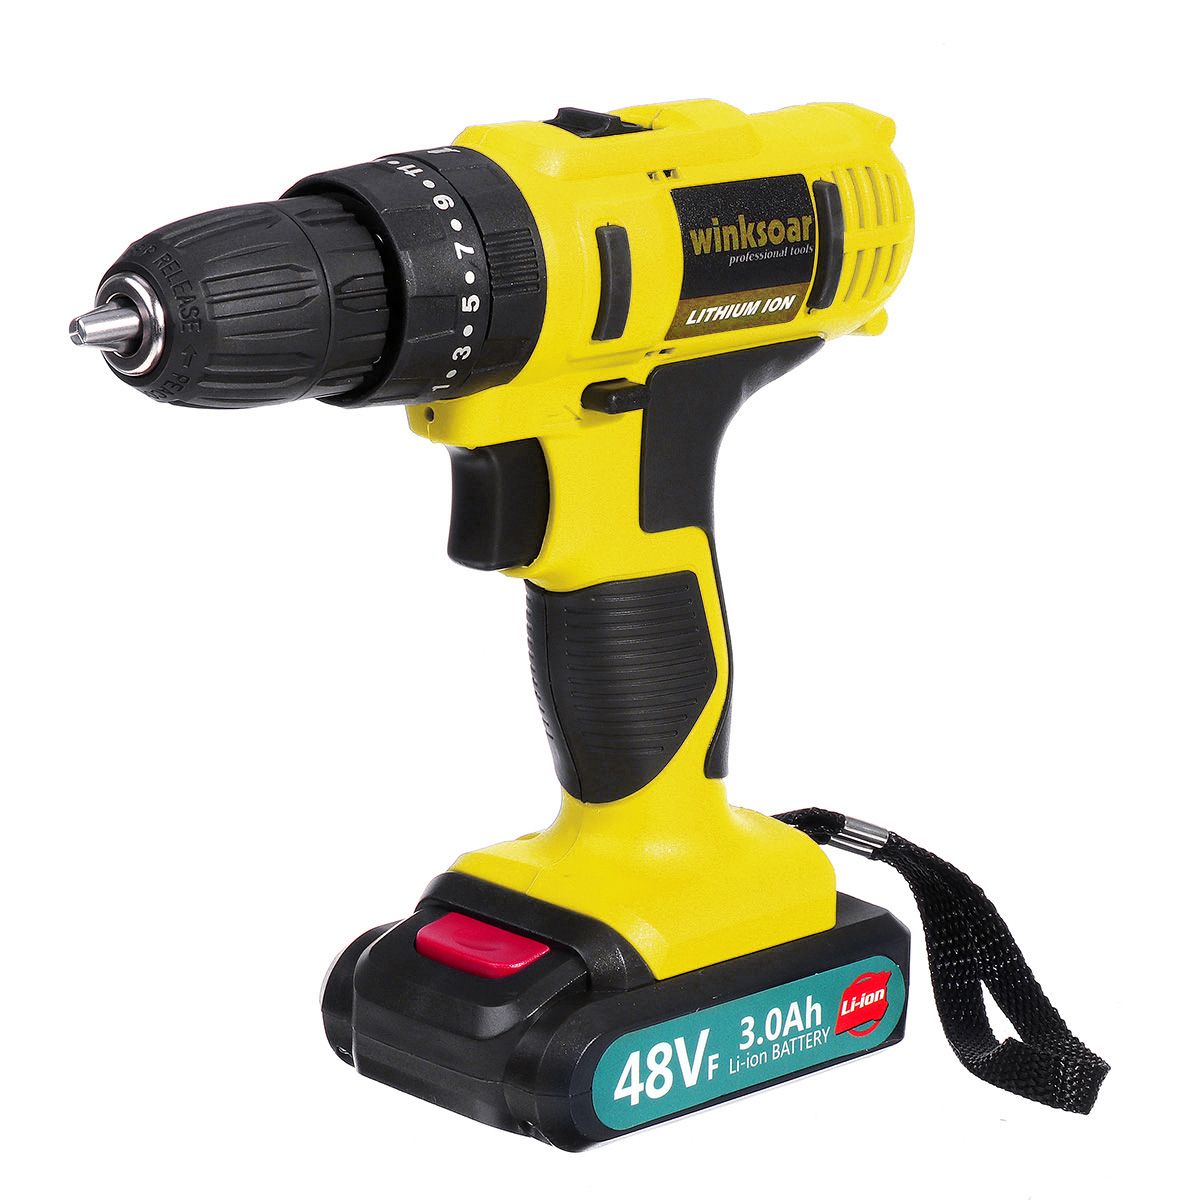 48VF-3000mAh-Electric-Screwdriver-Rechargeable-Power-Impact-Drill-251-Torque-W-1-or-2-Li-ion-Battery-1510743